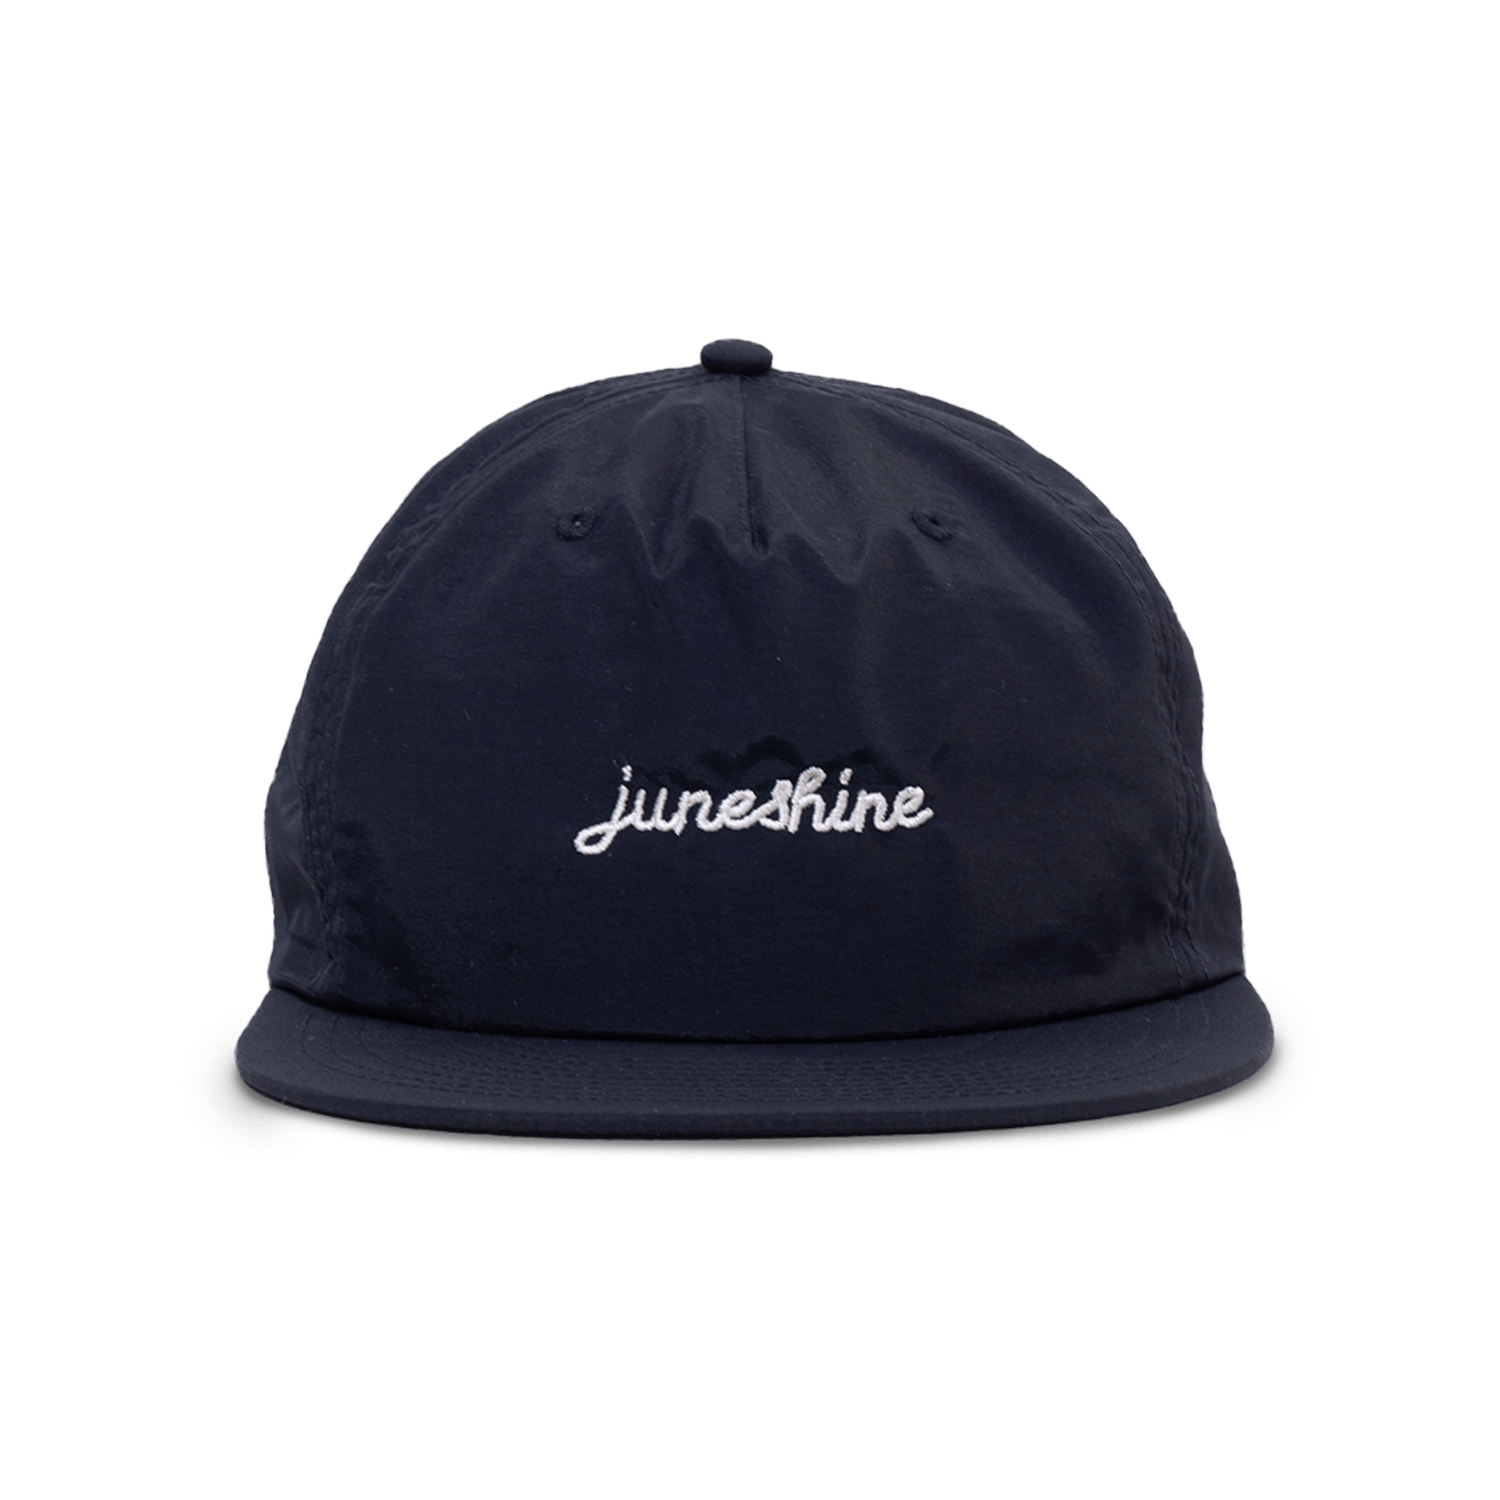 Front view of Navy blue hat with cursive embroidered writing that reads; june shine